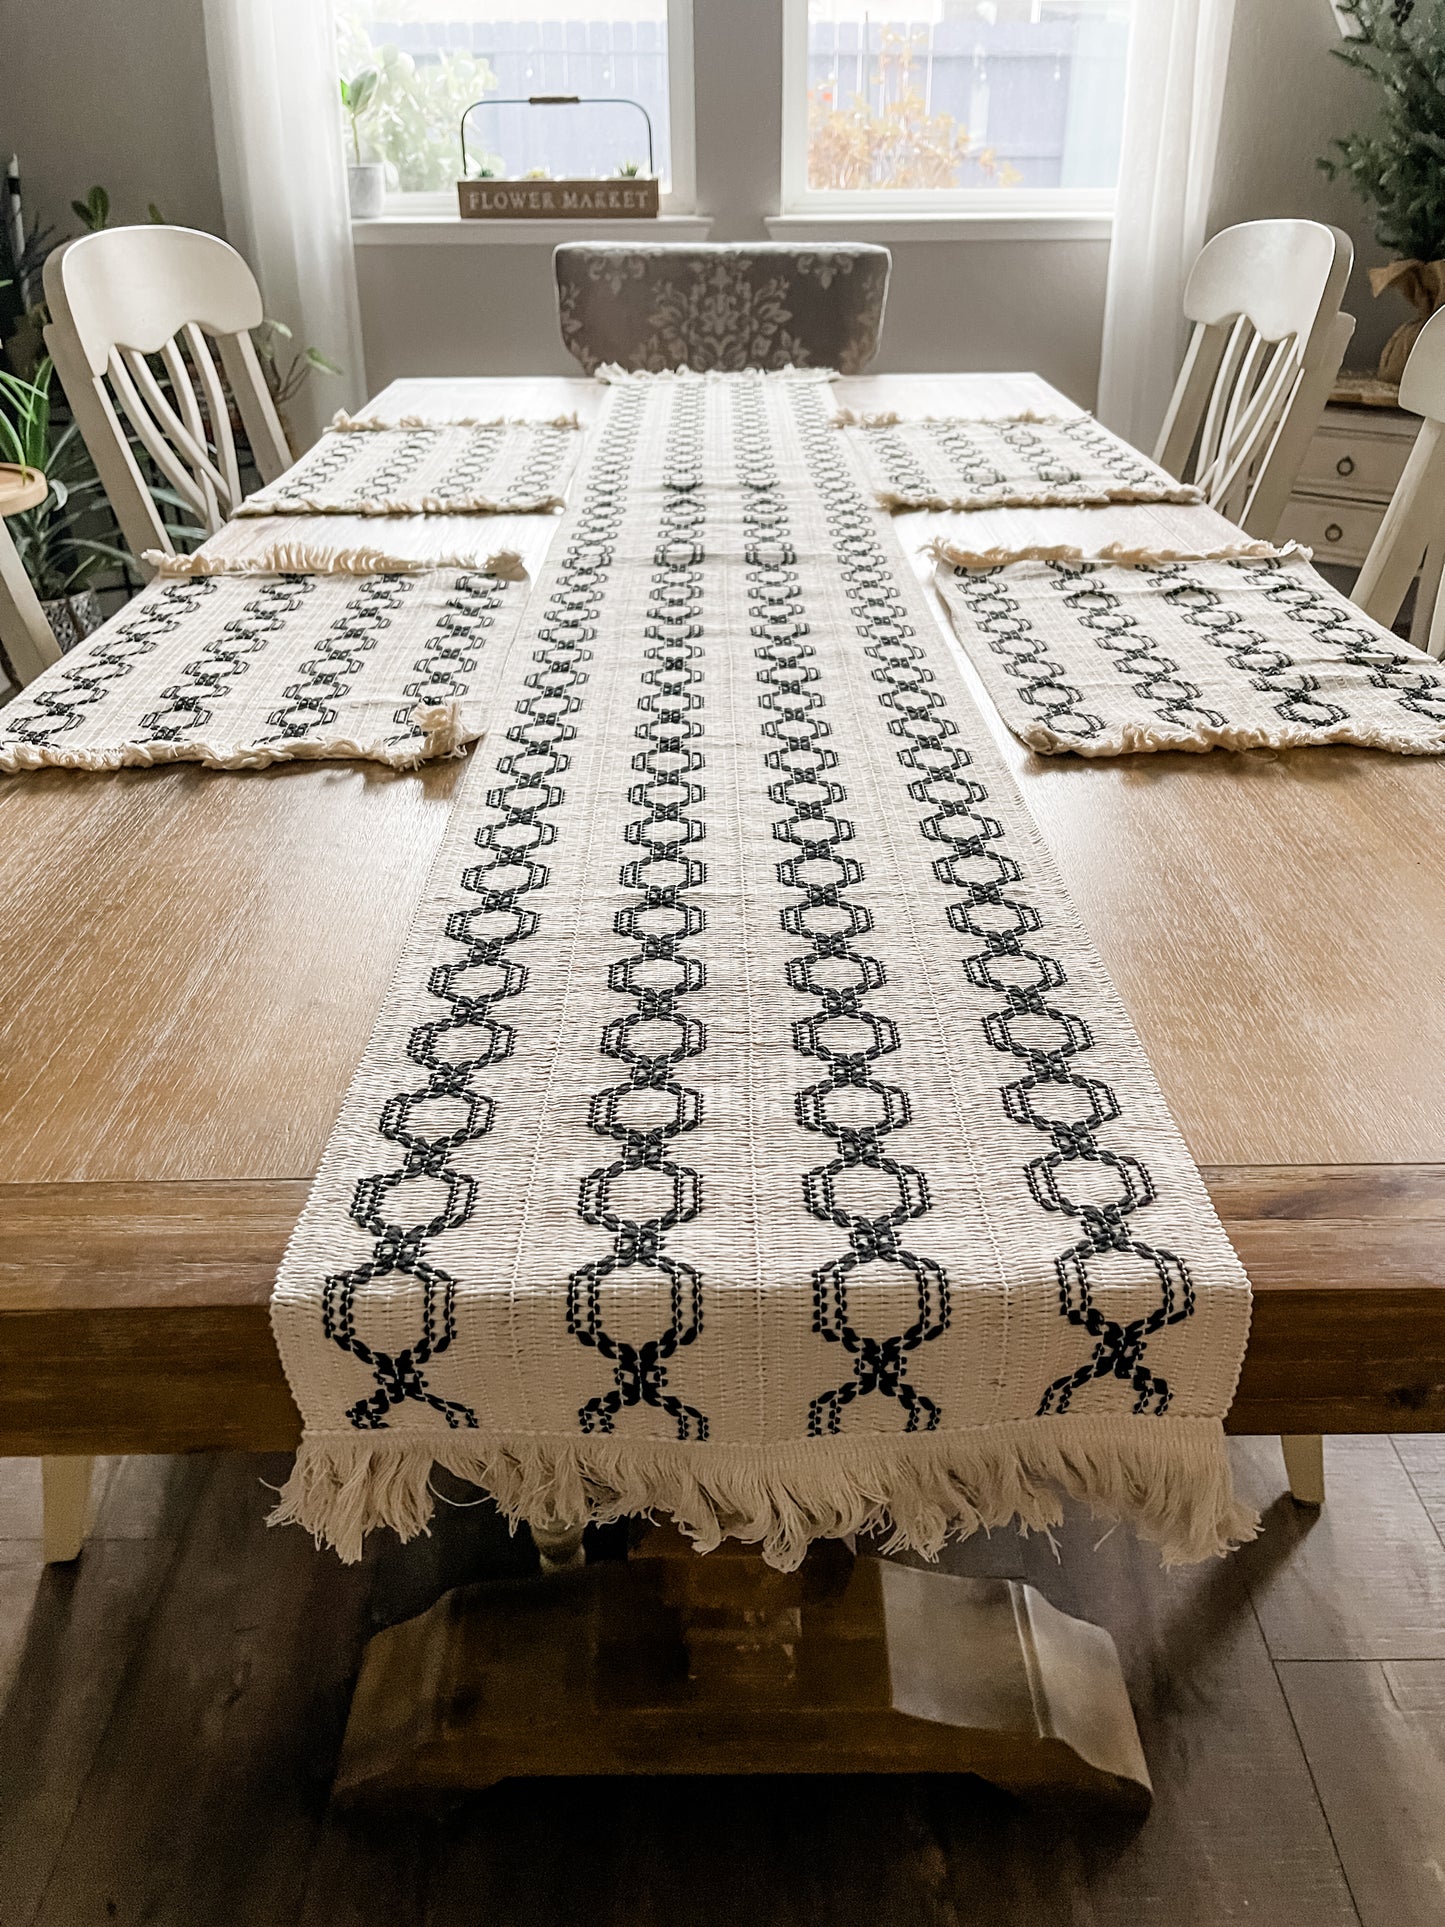 Classic Modern Printed Placemats Set of 4